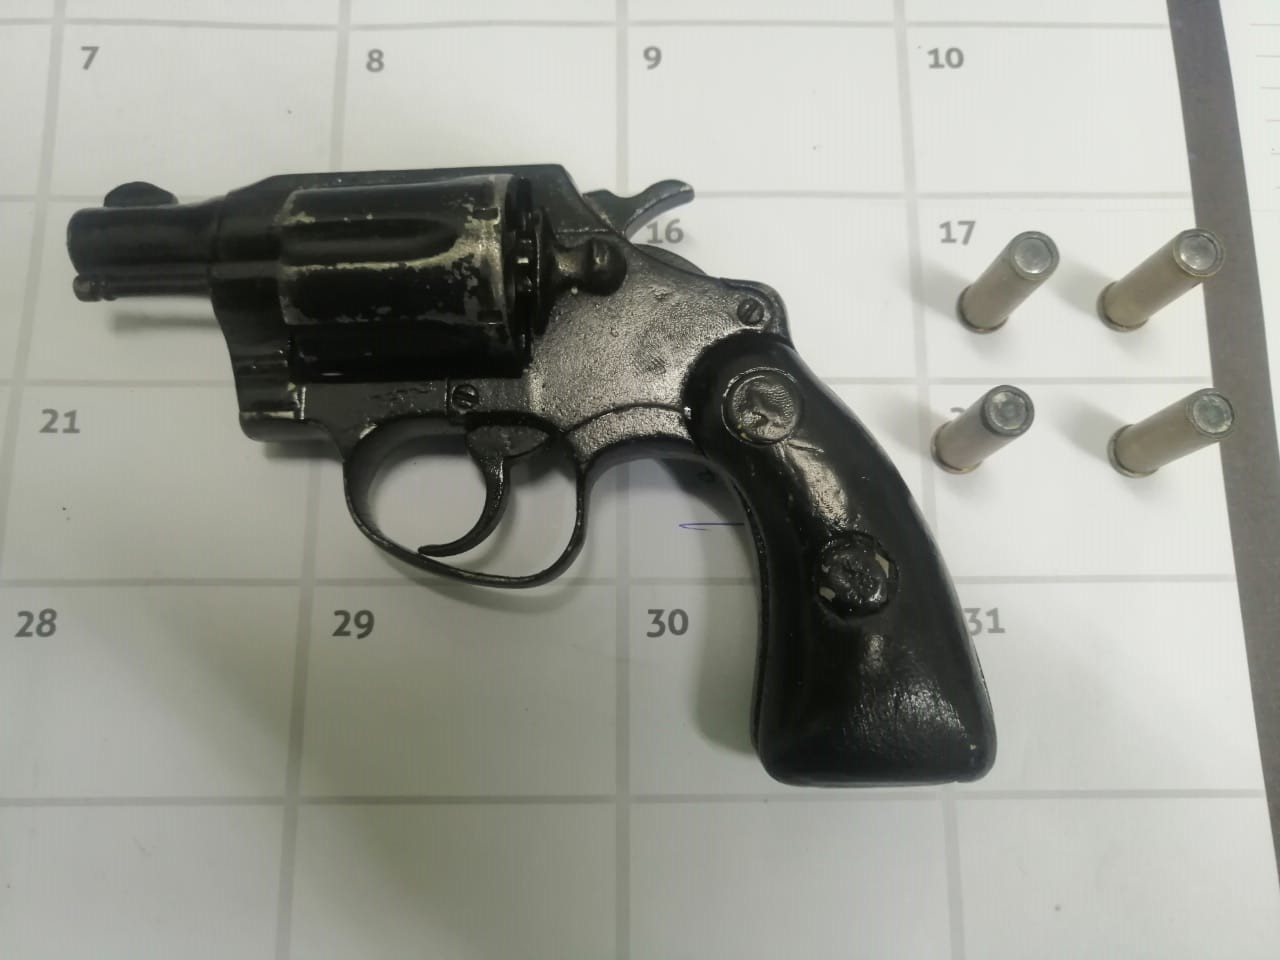 Two men arrested for possession of a firearm